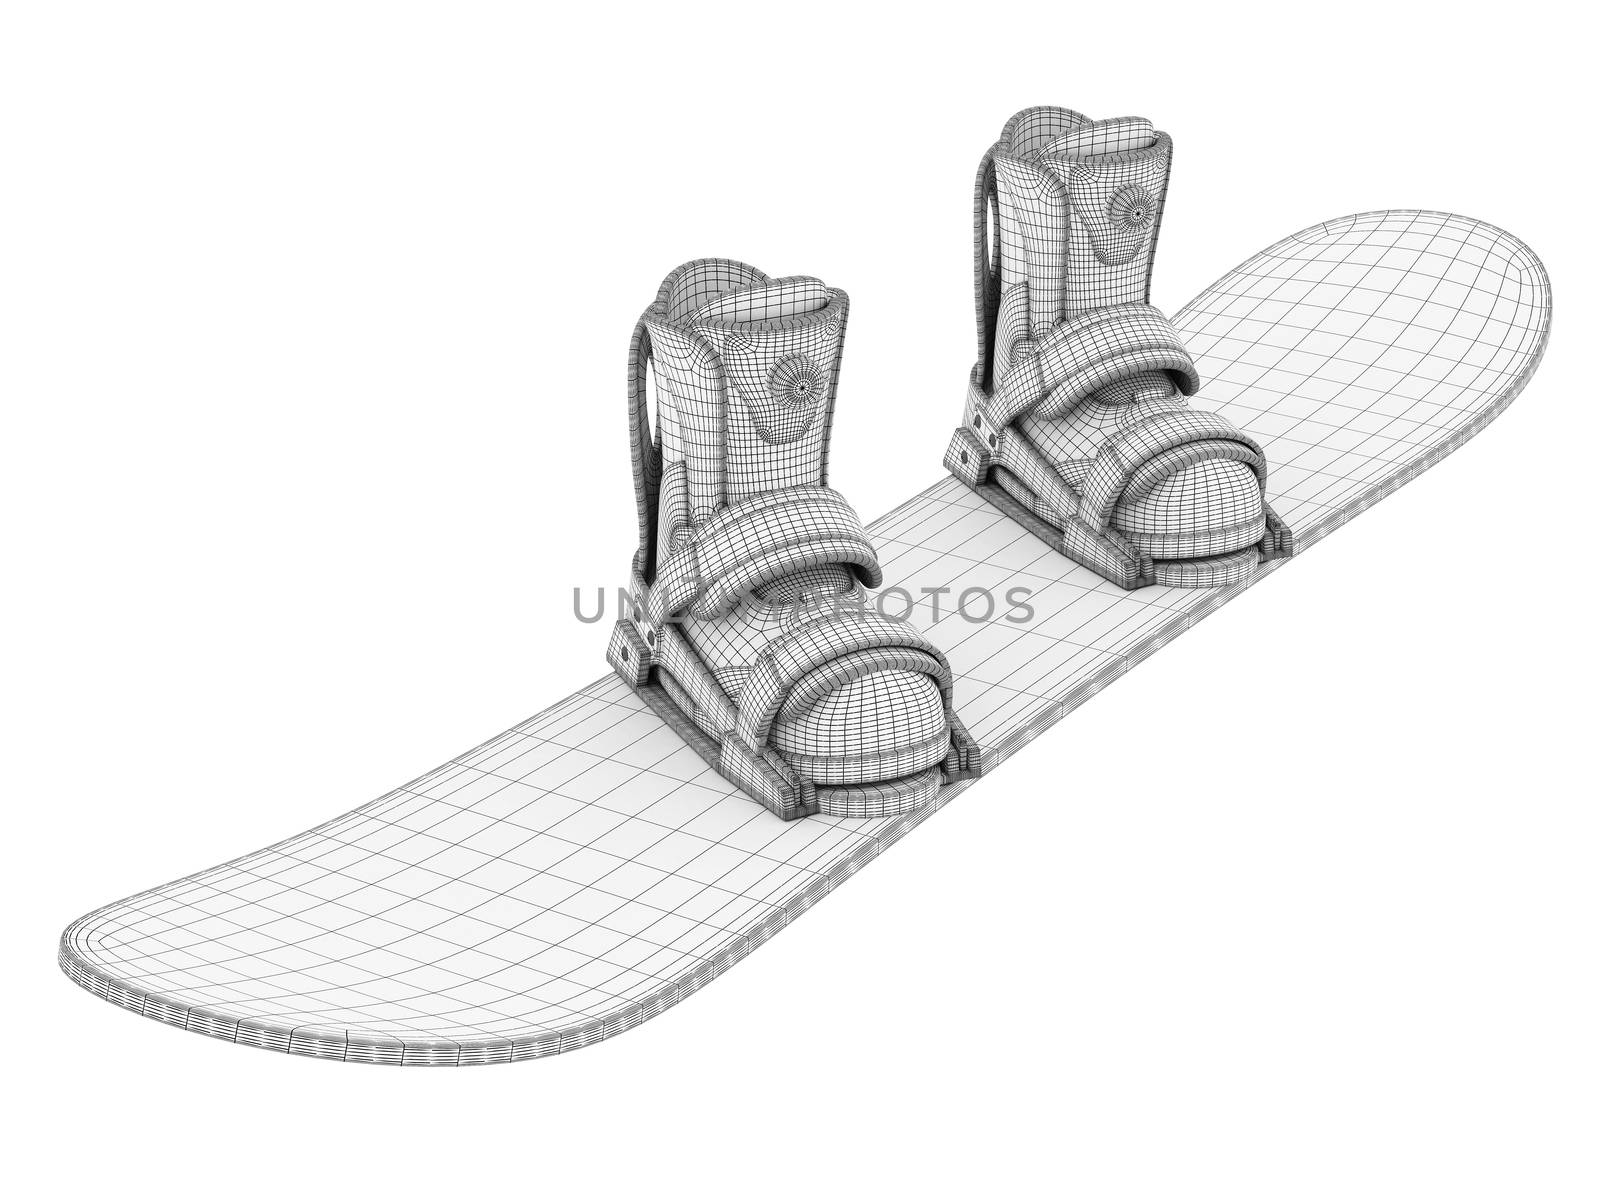 snowboard isolated on a white background